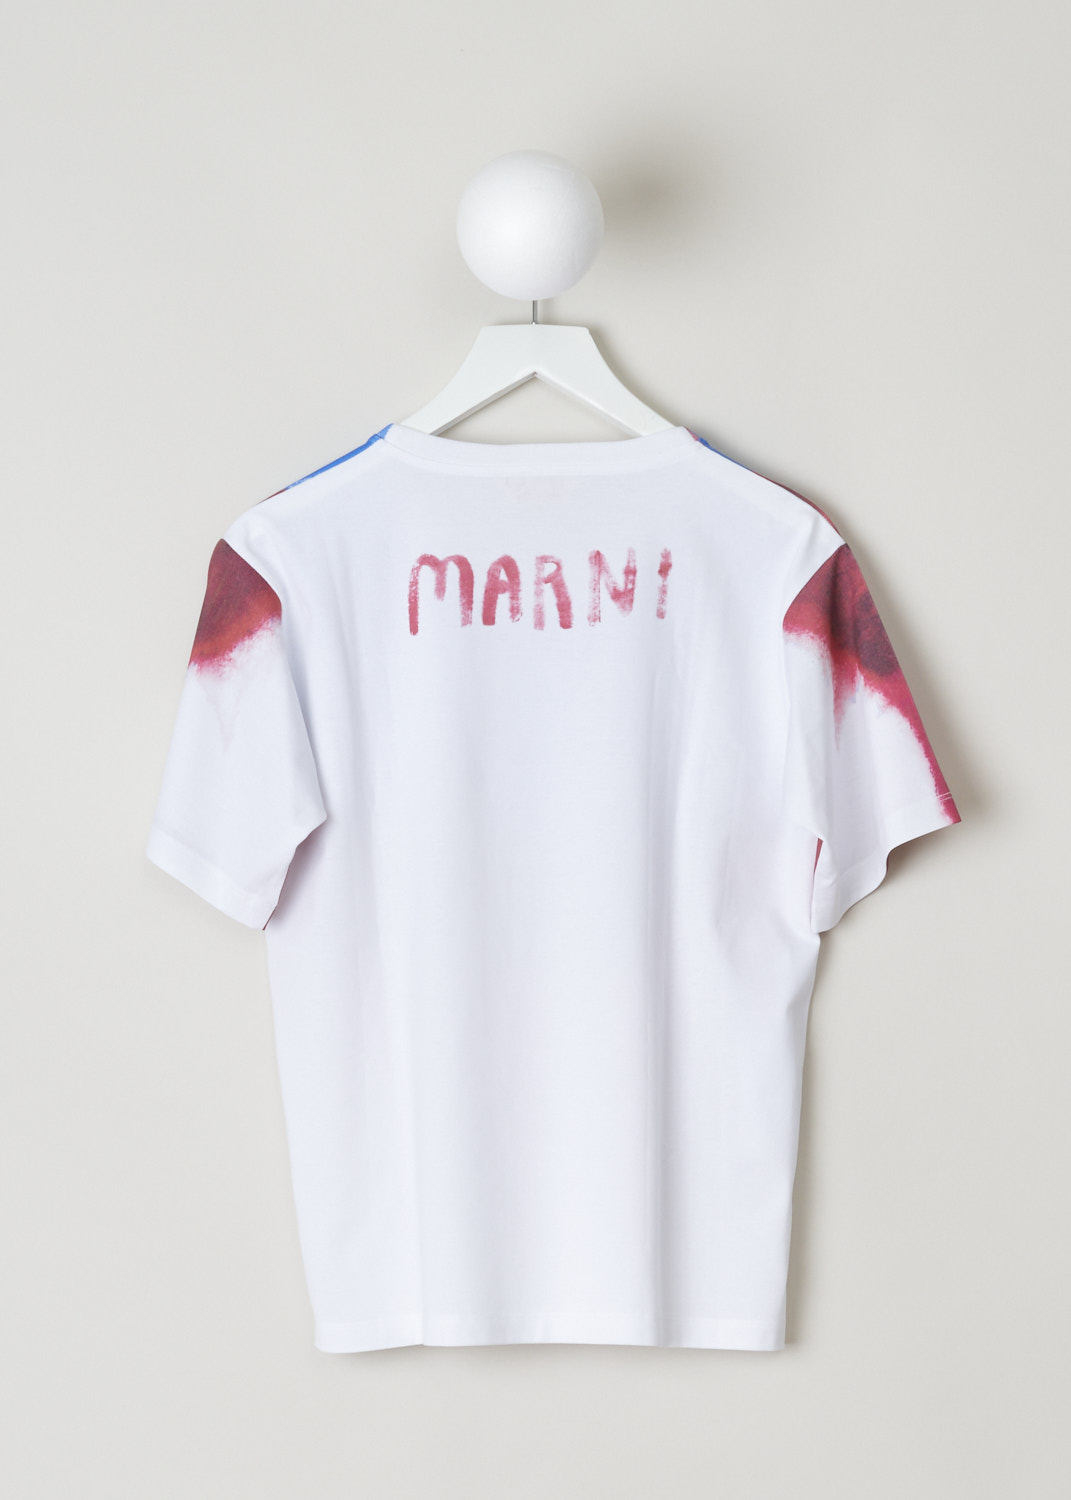 Marni, White printed t-shirt, THJEL32EPJ_USCT05_DDB56, print, red, white, blue, back, White t-shirt embellished with a lovely print in blue and red. 